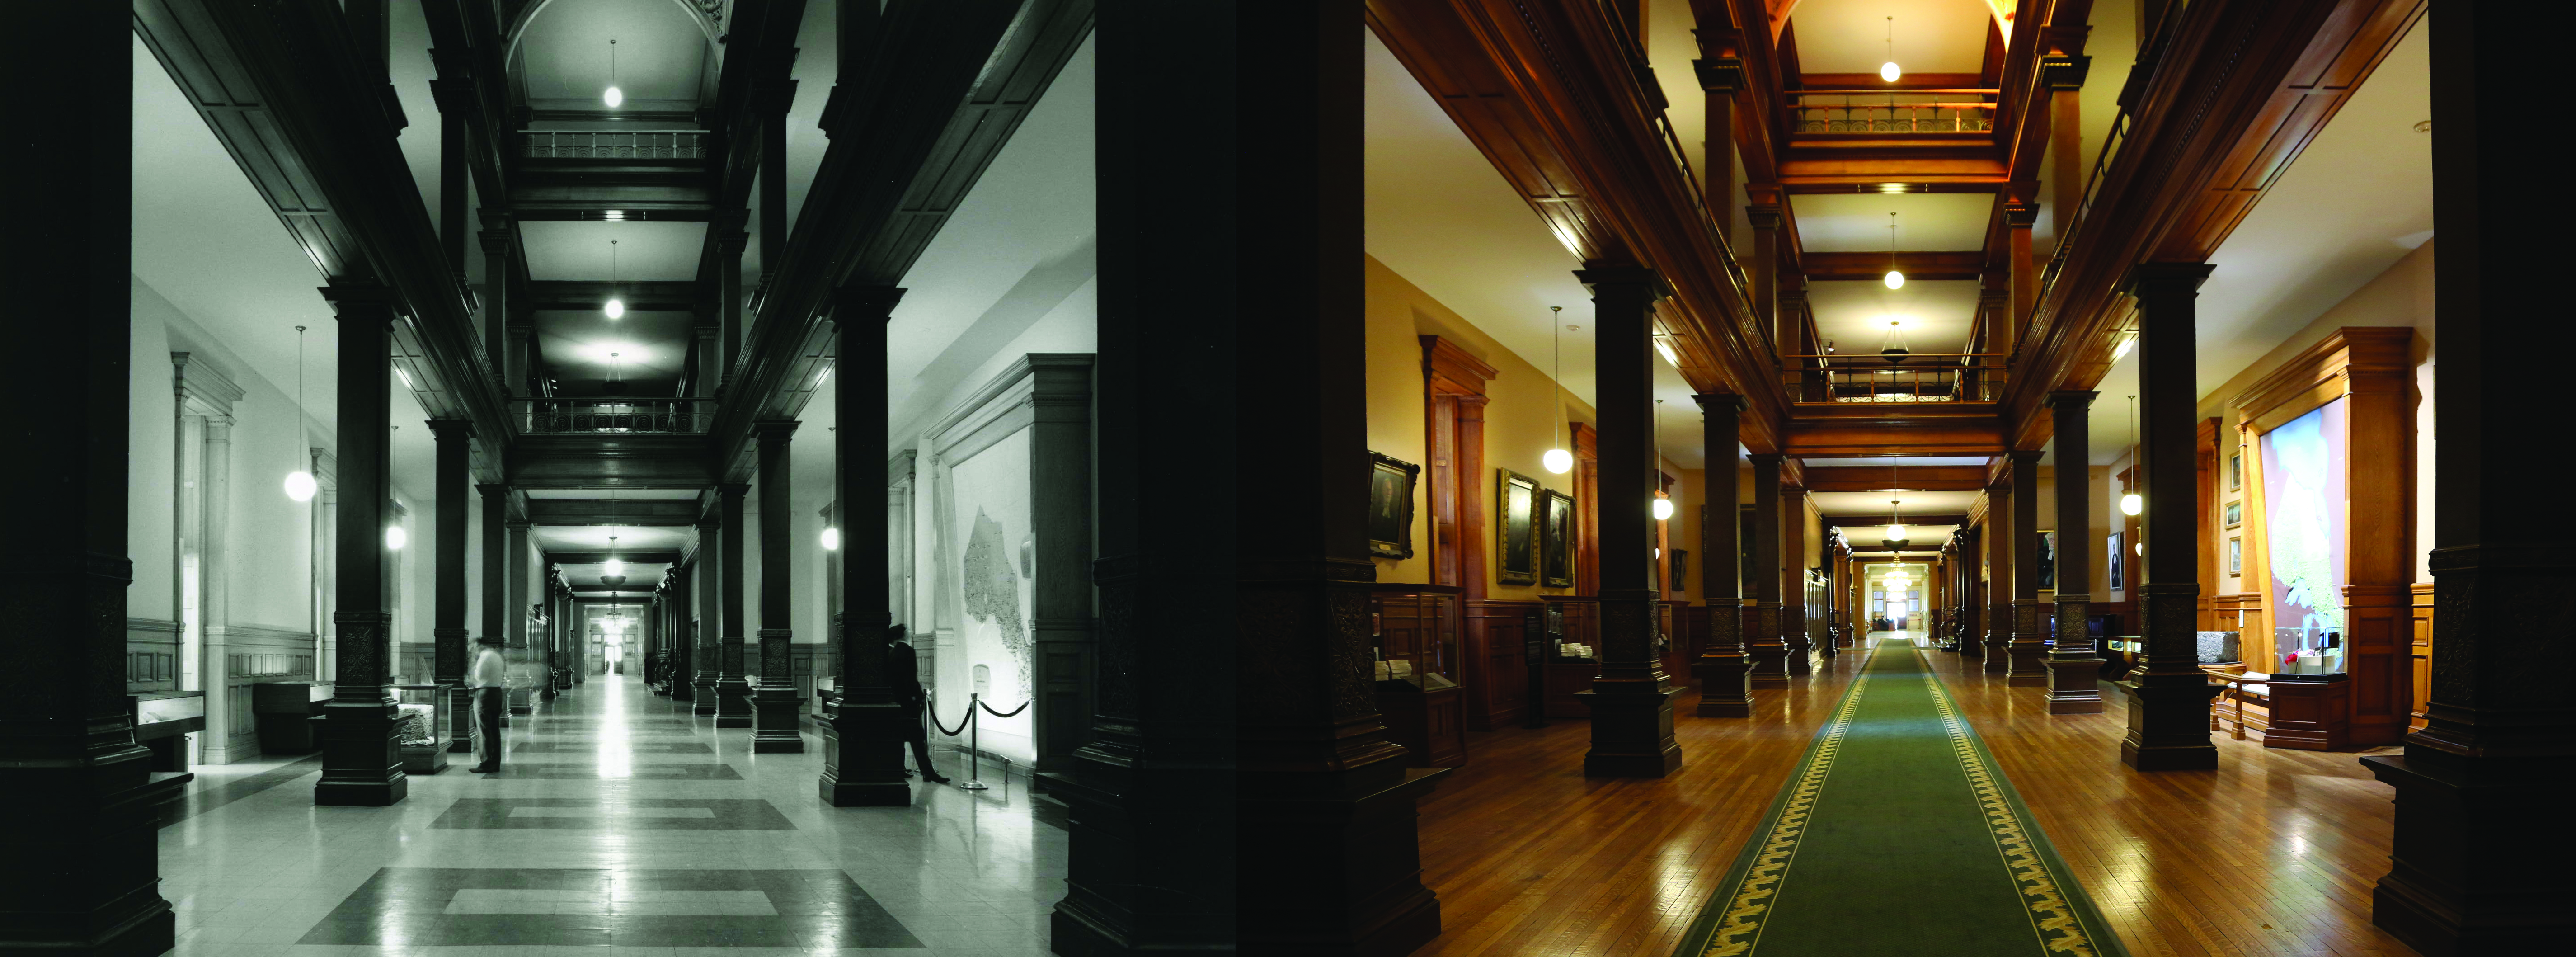 Picture showing a contrasting view of the east hall in Ontario's Legislative Building